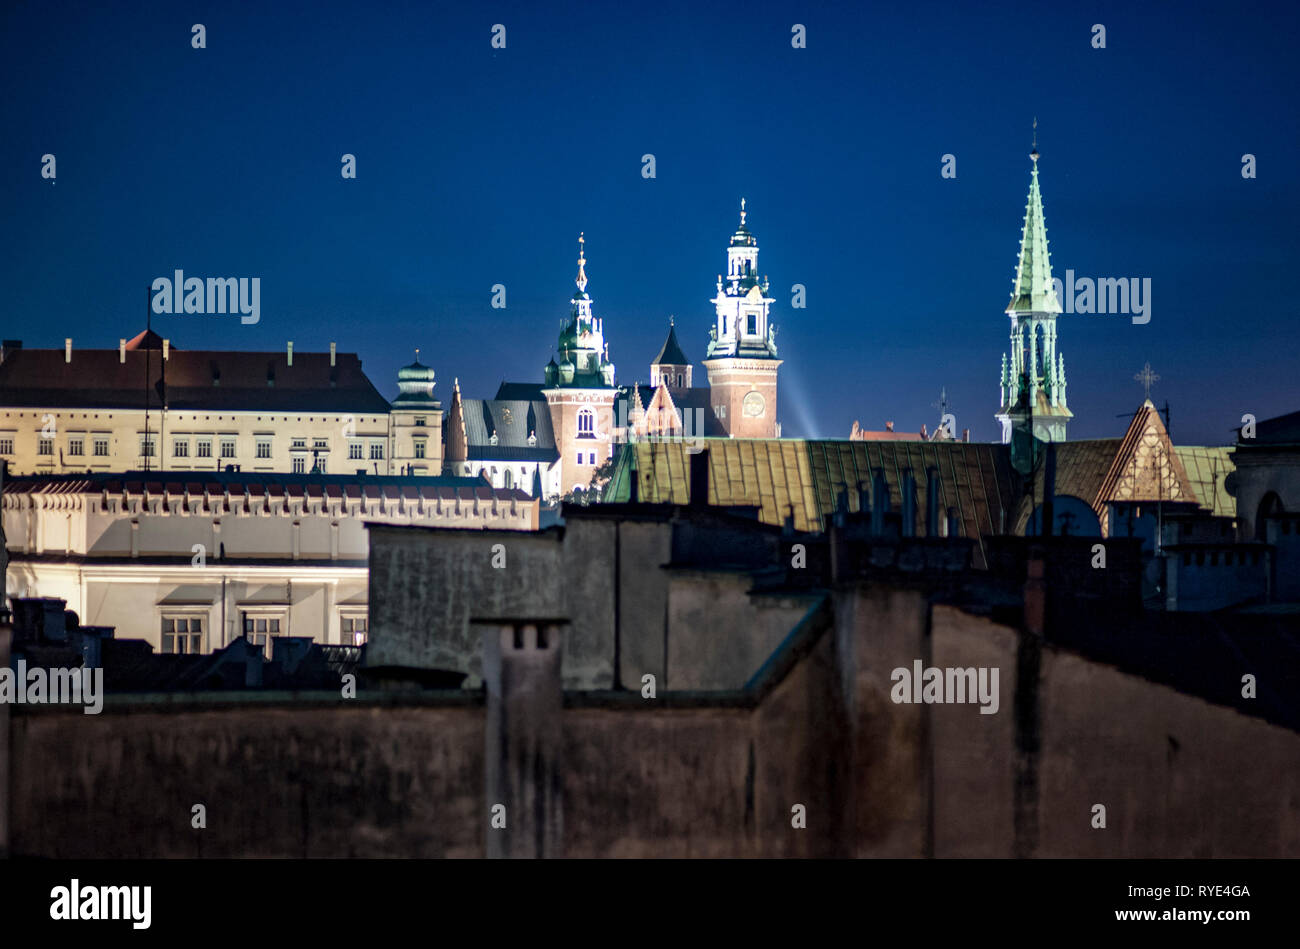 Nightime landscape depicting the skyline of Cracow, Poland with lights and reflections Stock Photo